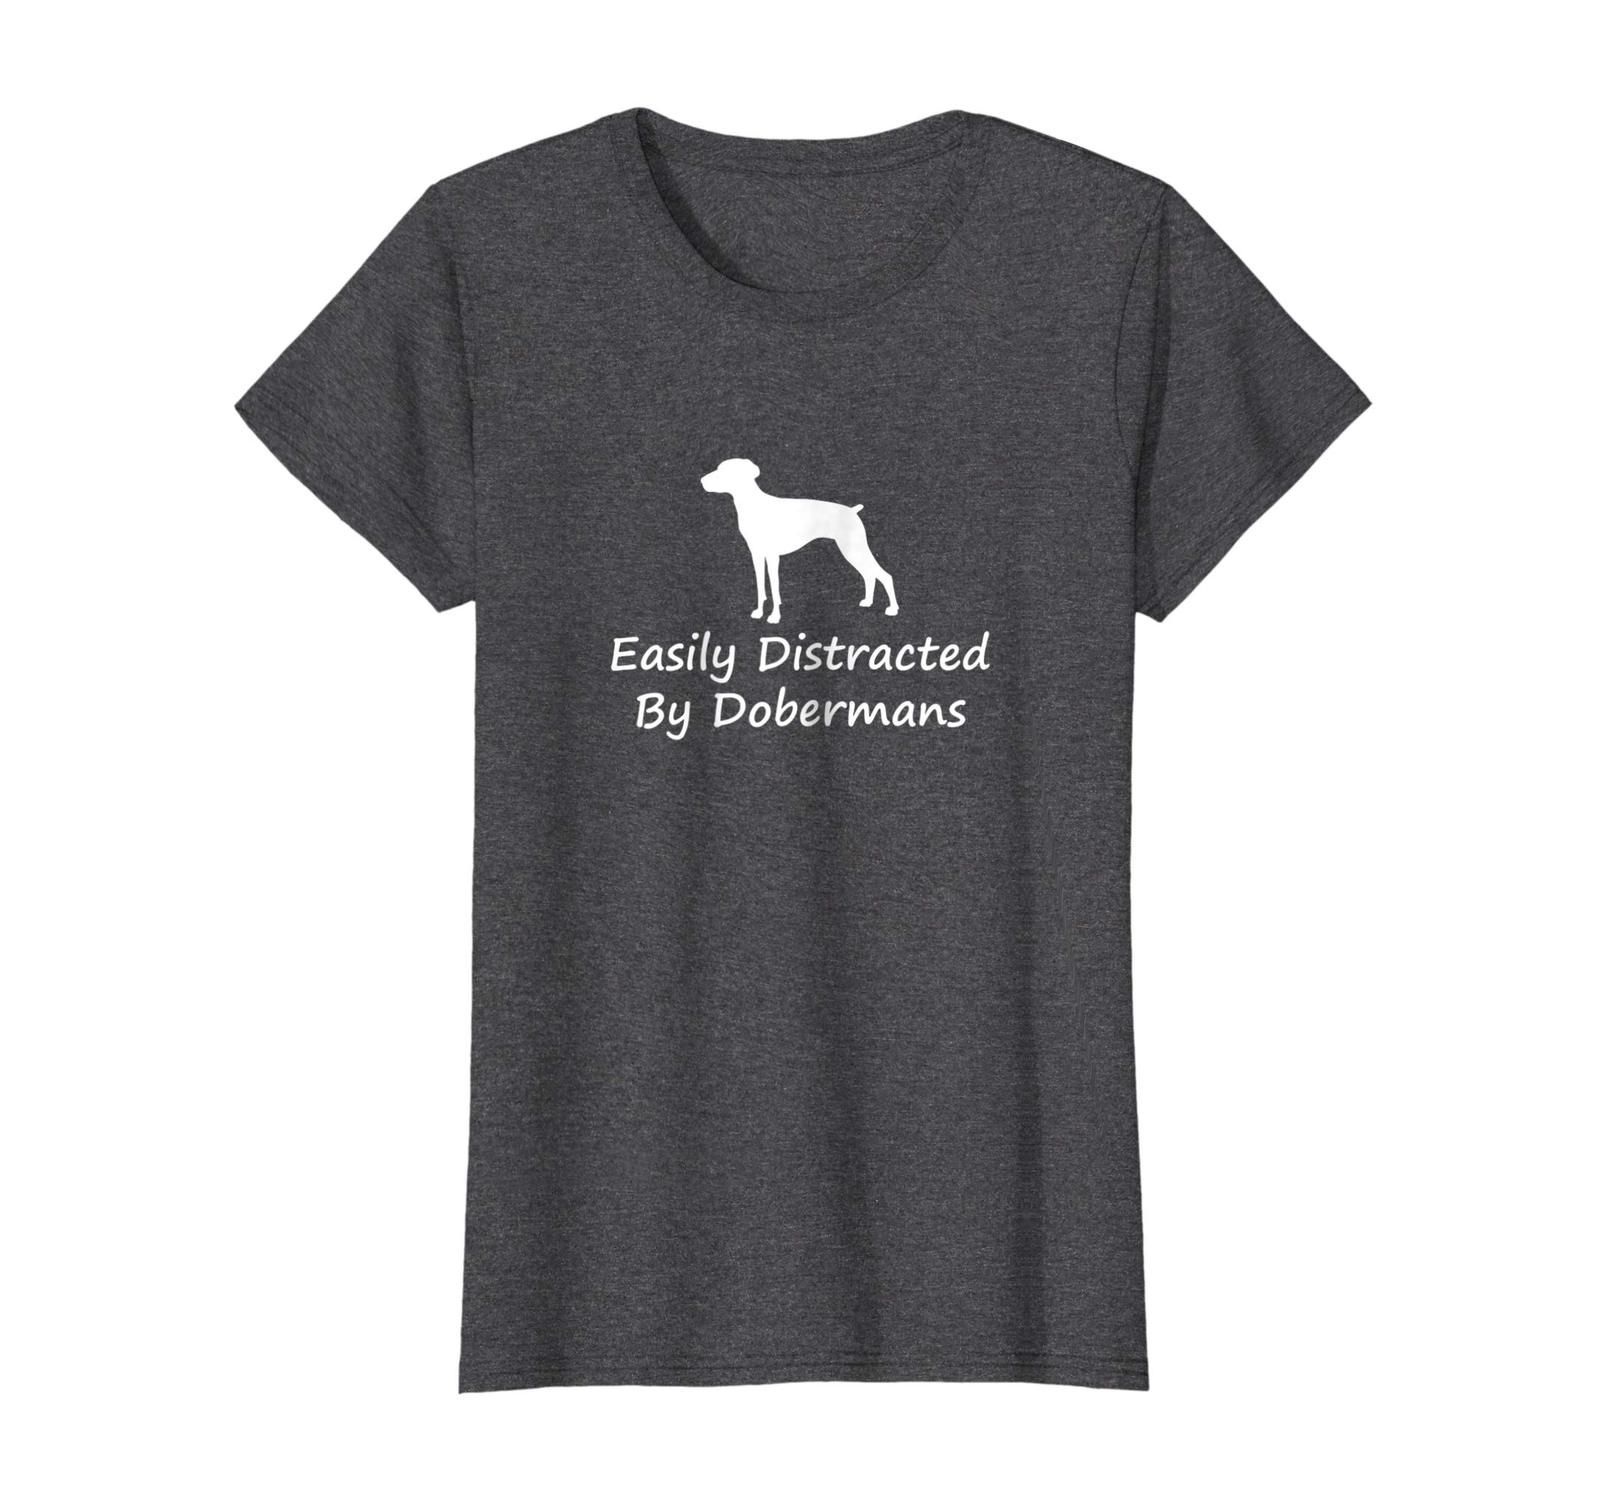 Dog Fashion - Easily Distracted By Dobermans Funny Dog Lover T-Shirt Wowen